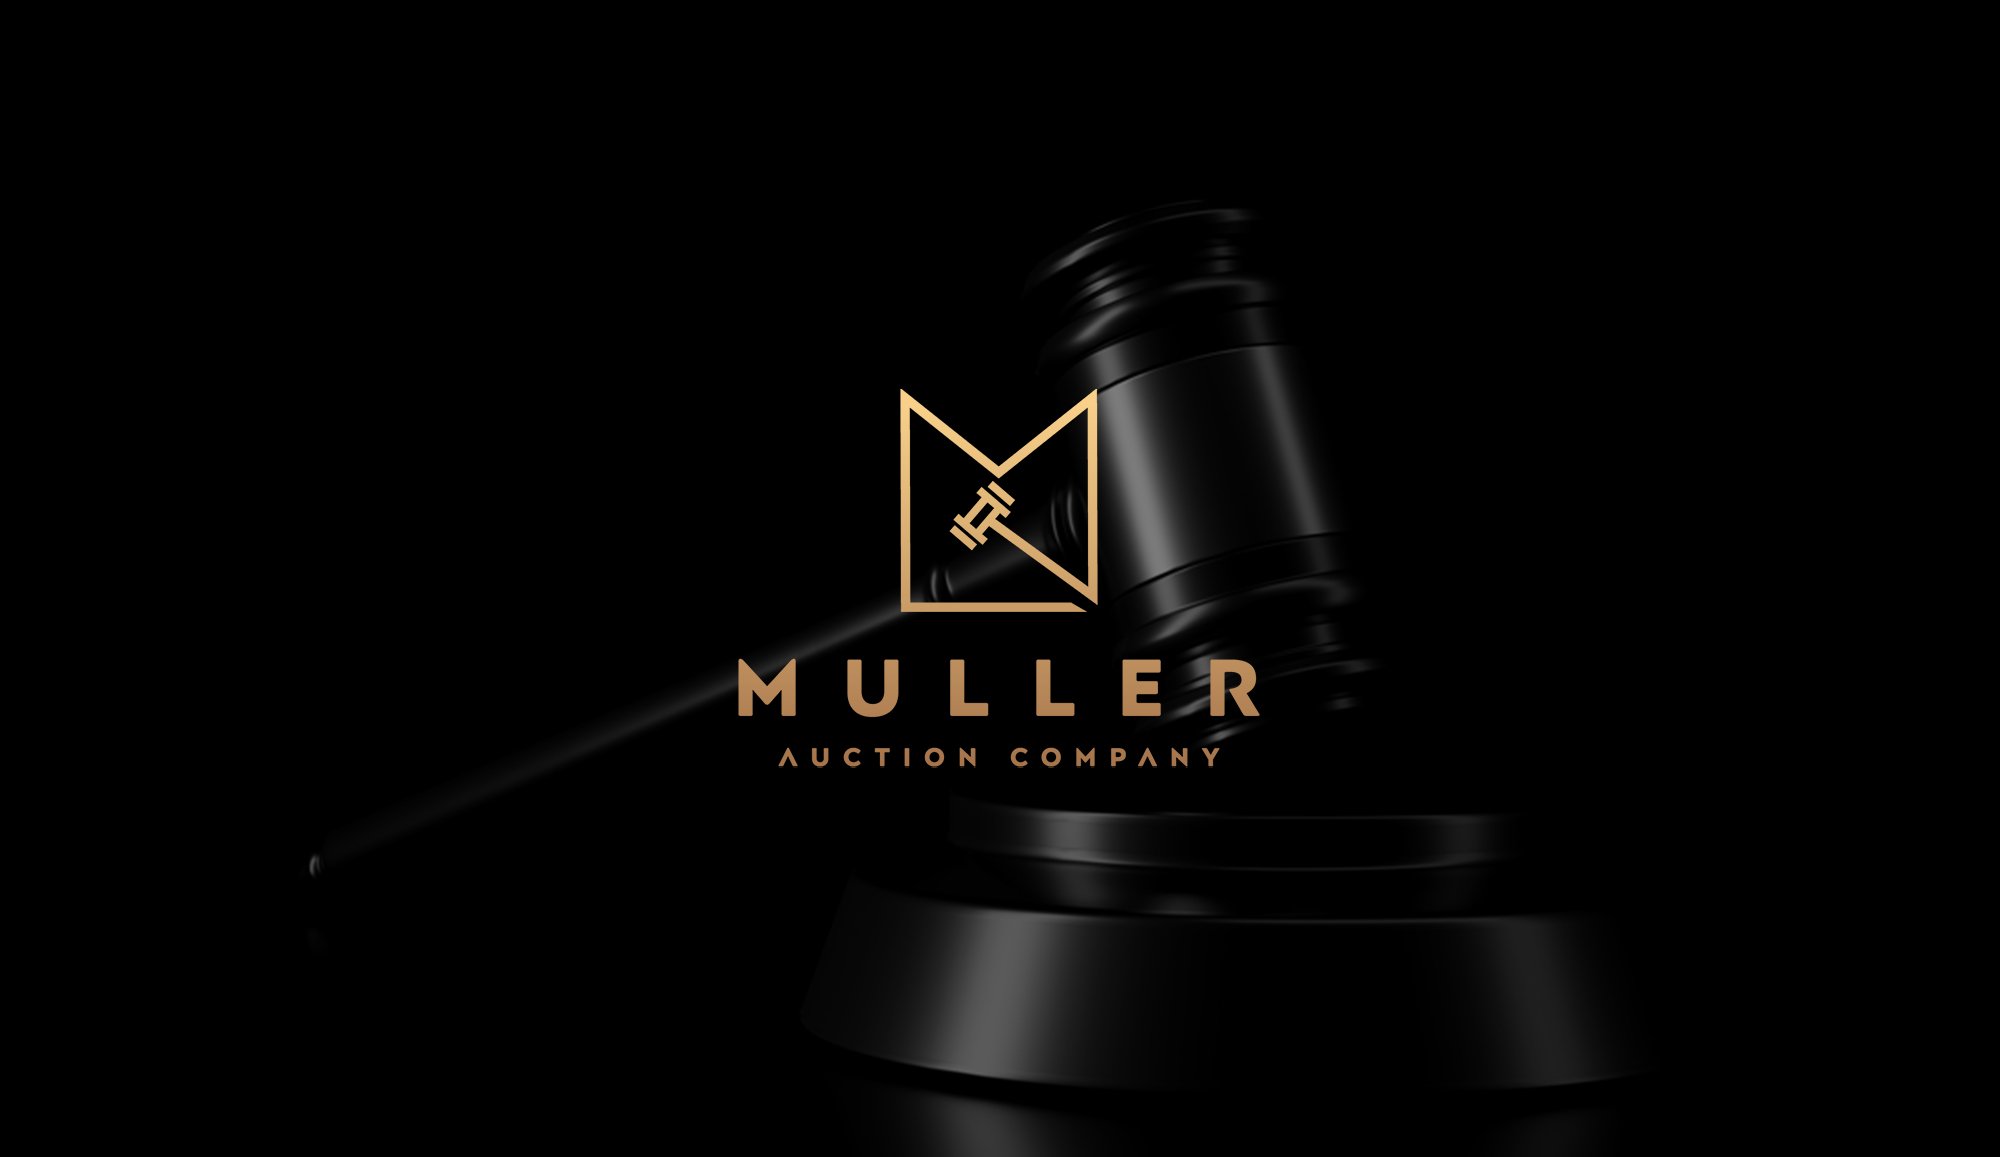 Muller Auction Company